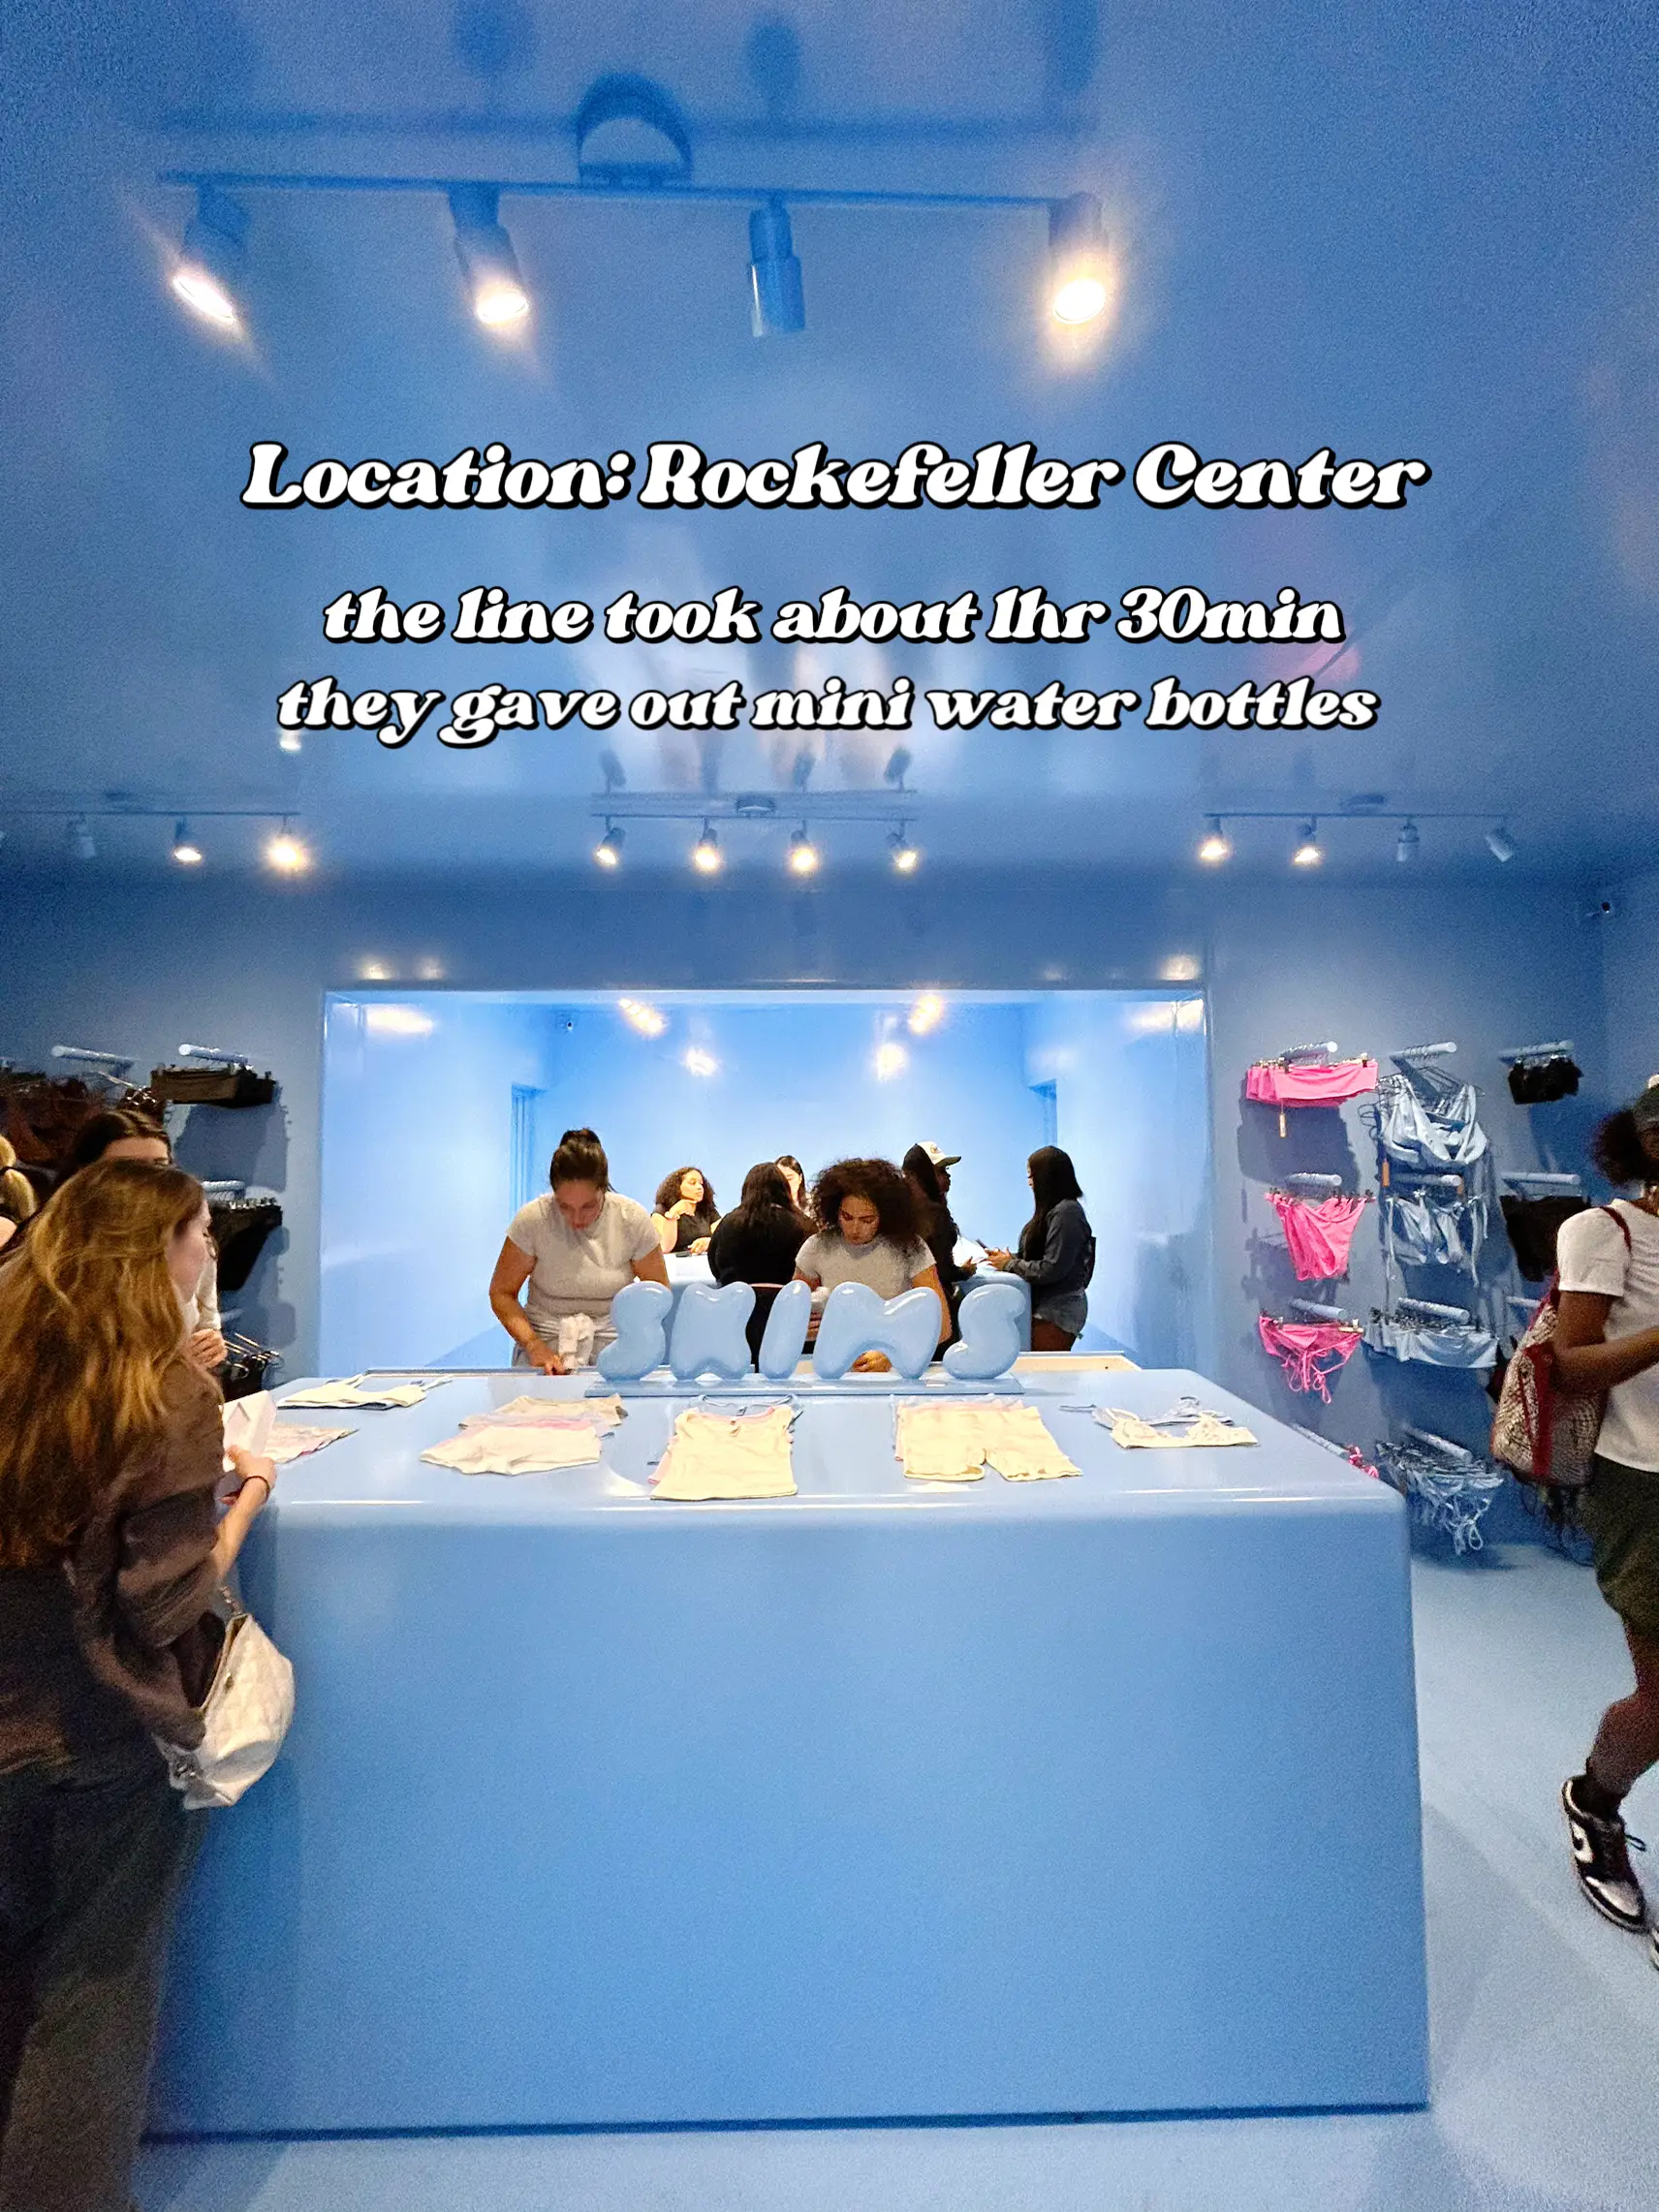 SKIMS Pop-Up Rockefeller Center: Hours, Dates and More to Know